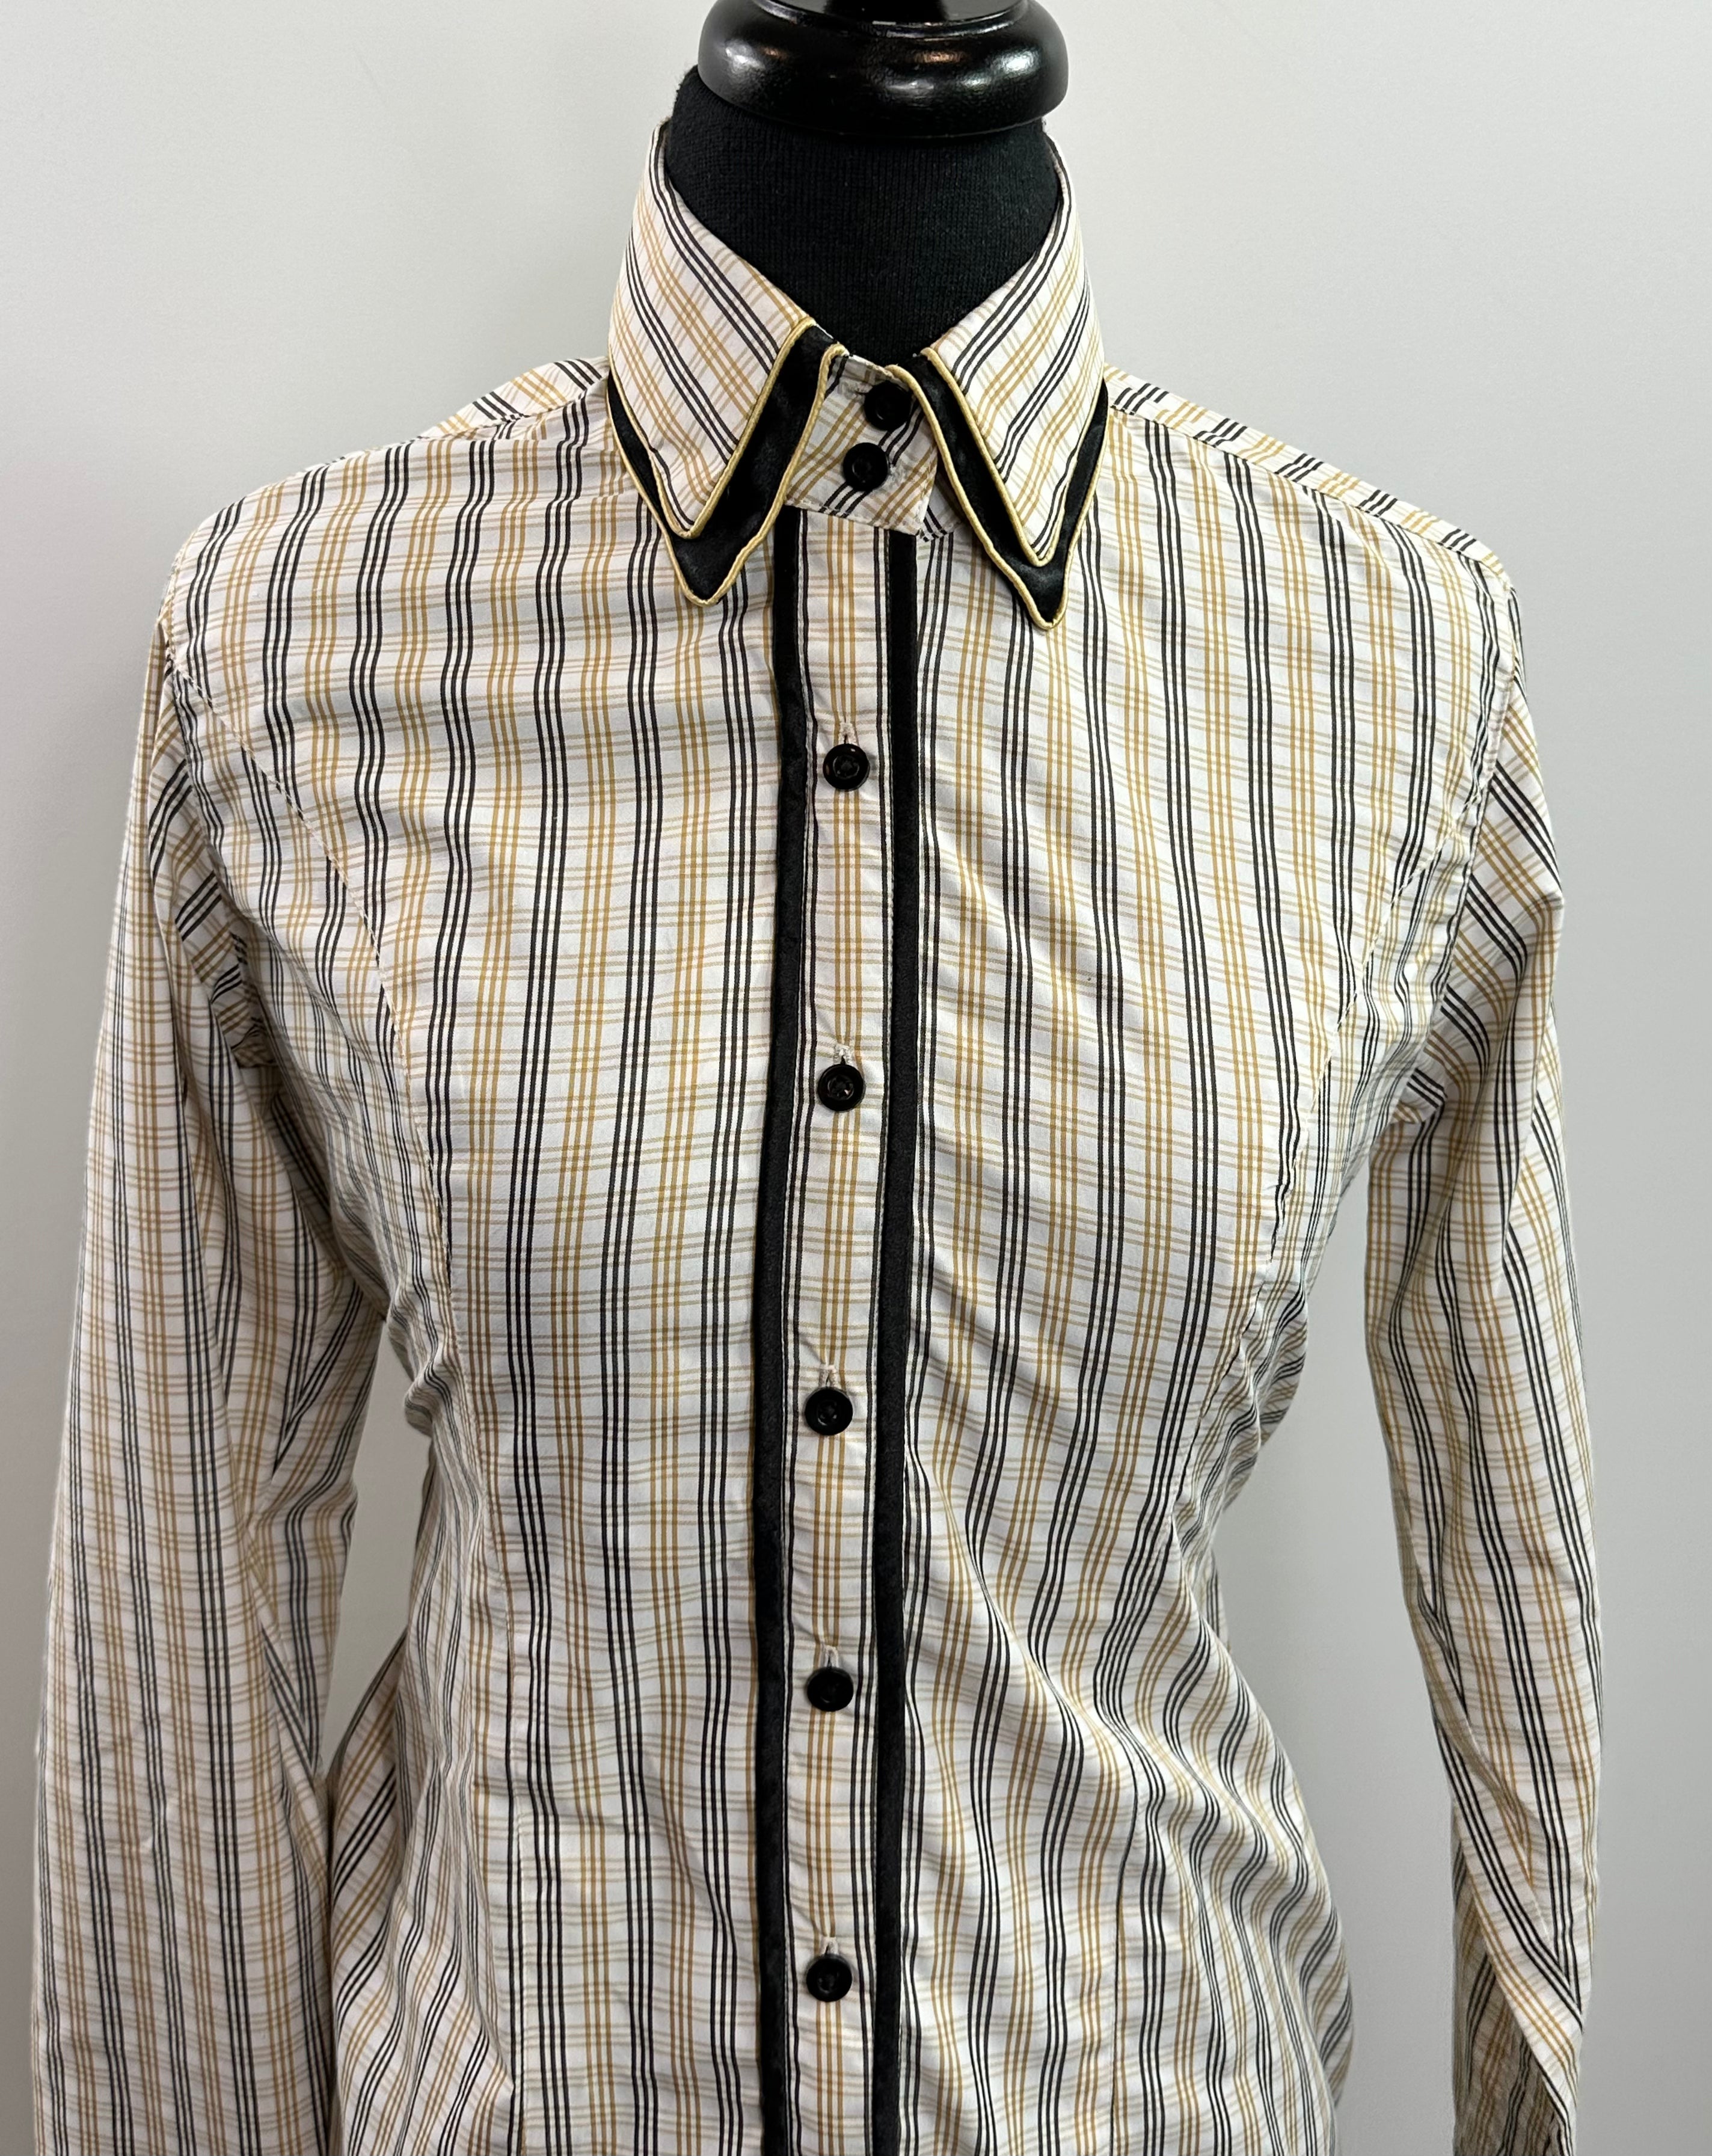 Western Button Up White Black and Gold with Hidden Zipper